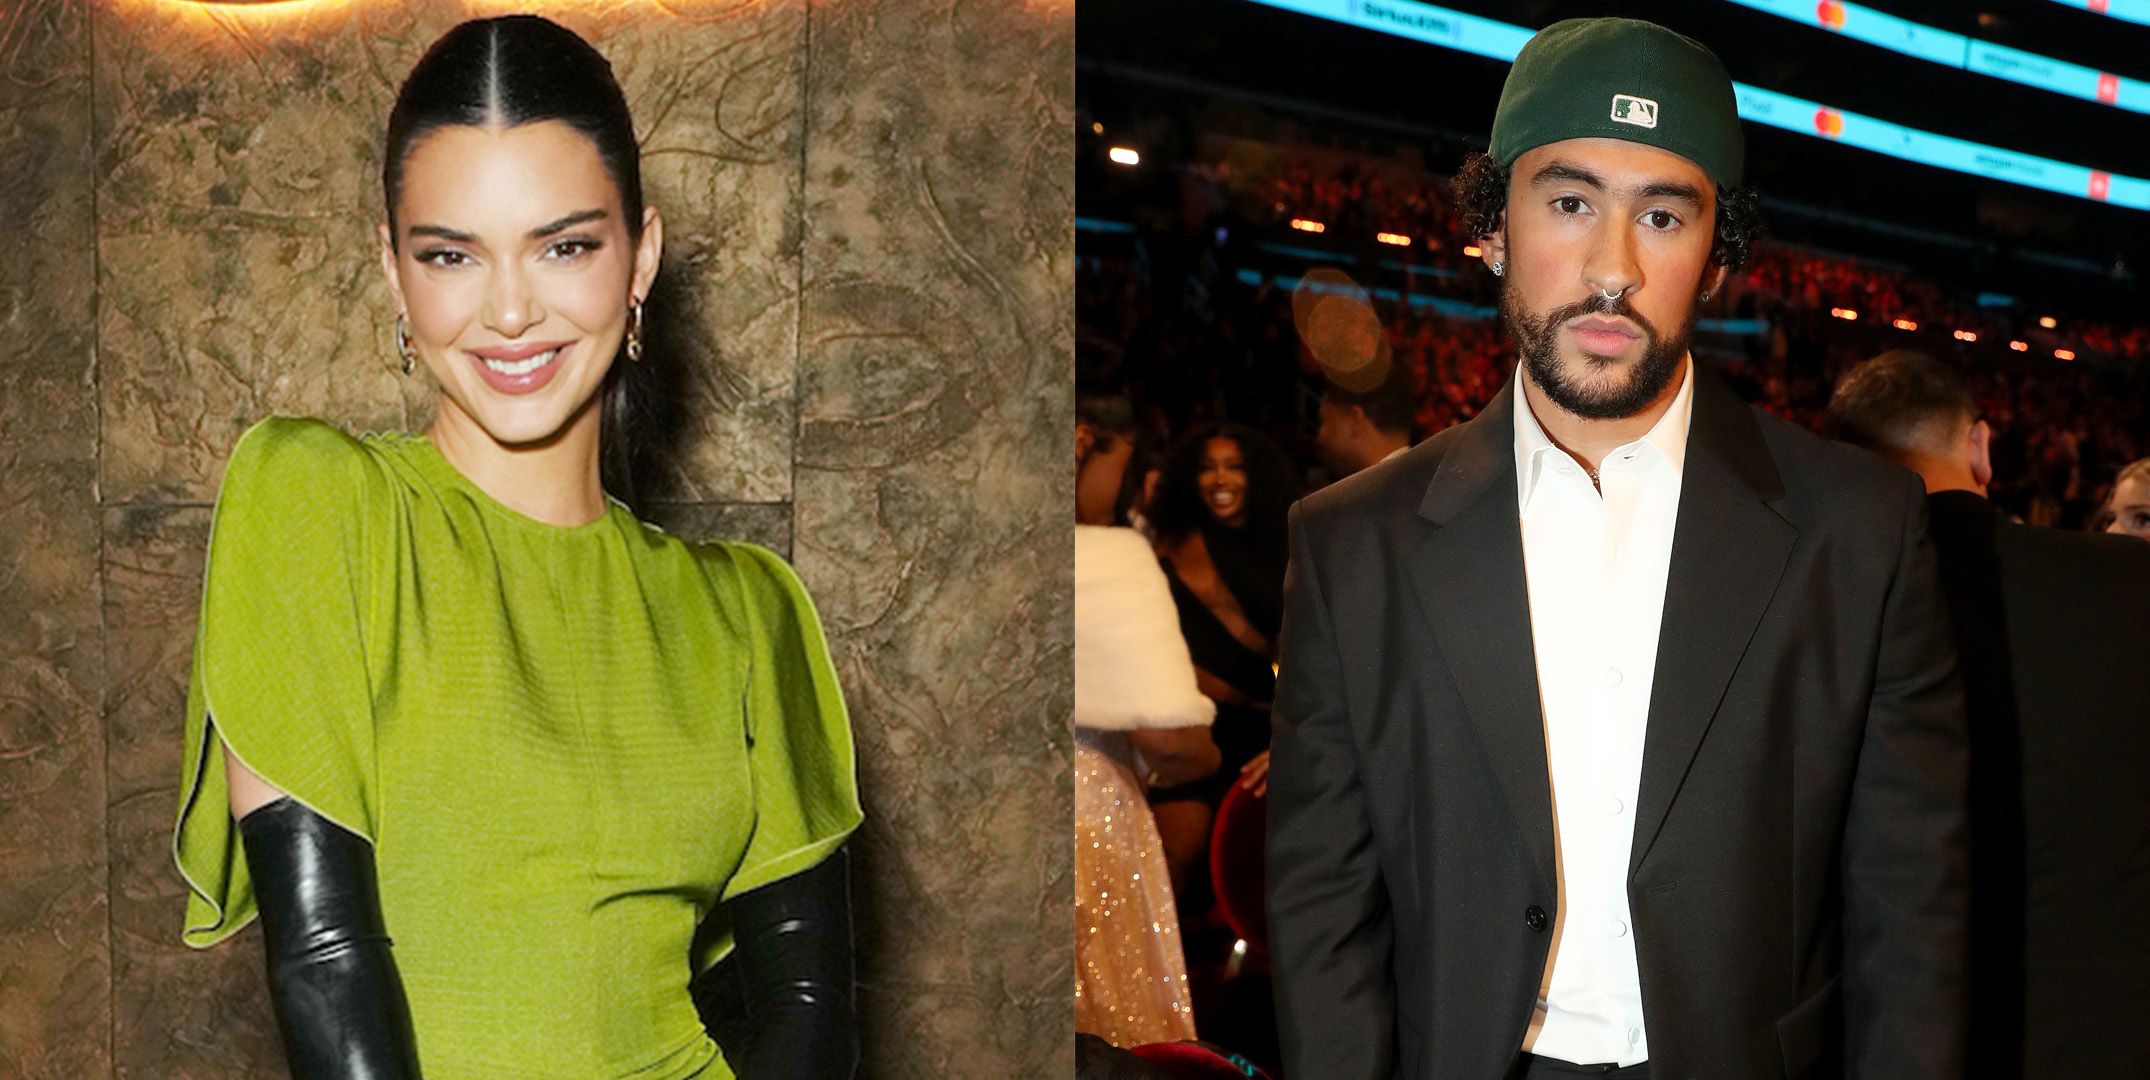 Bad Bunny appears to call out Kendall Jenner's ex boyfriend in new